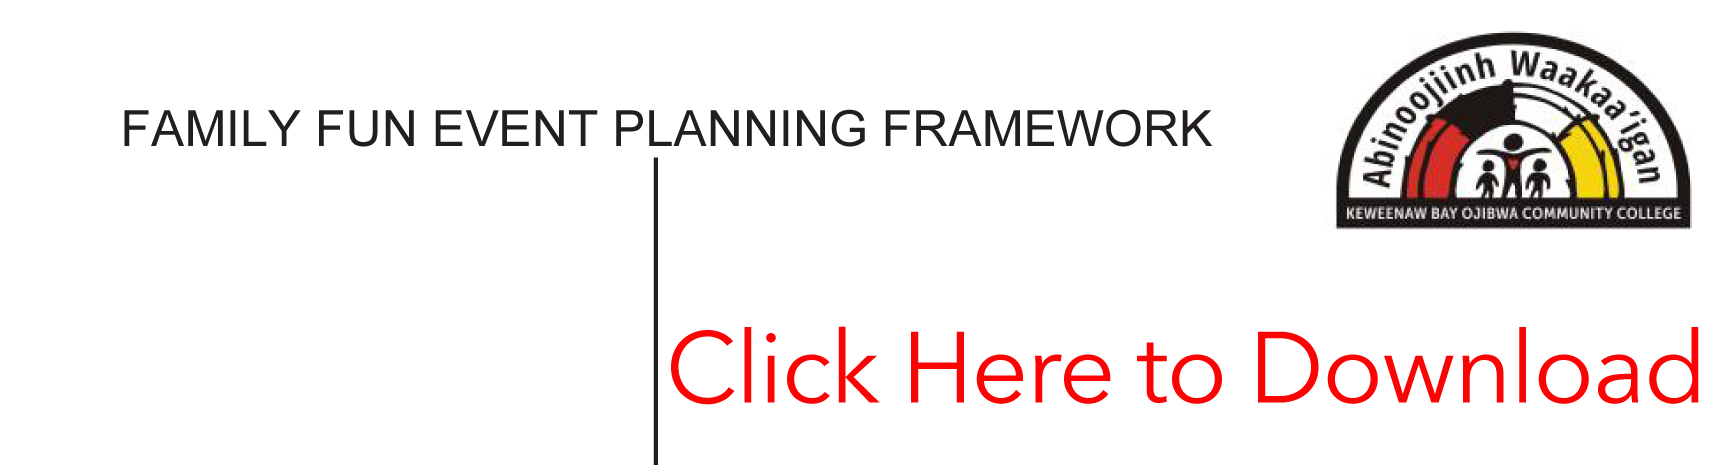 Come learn more about KBOCC “Family Fun Event Planning Framework” and “Indicators for Family Fun Event Framework” by clicking on the PDF here.